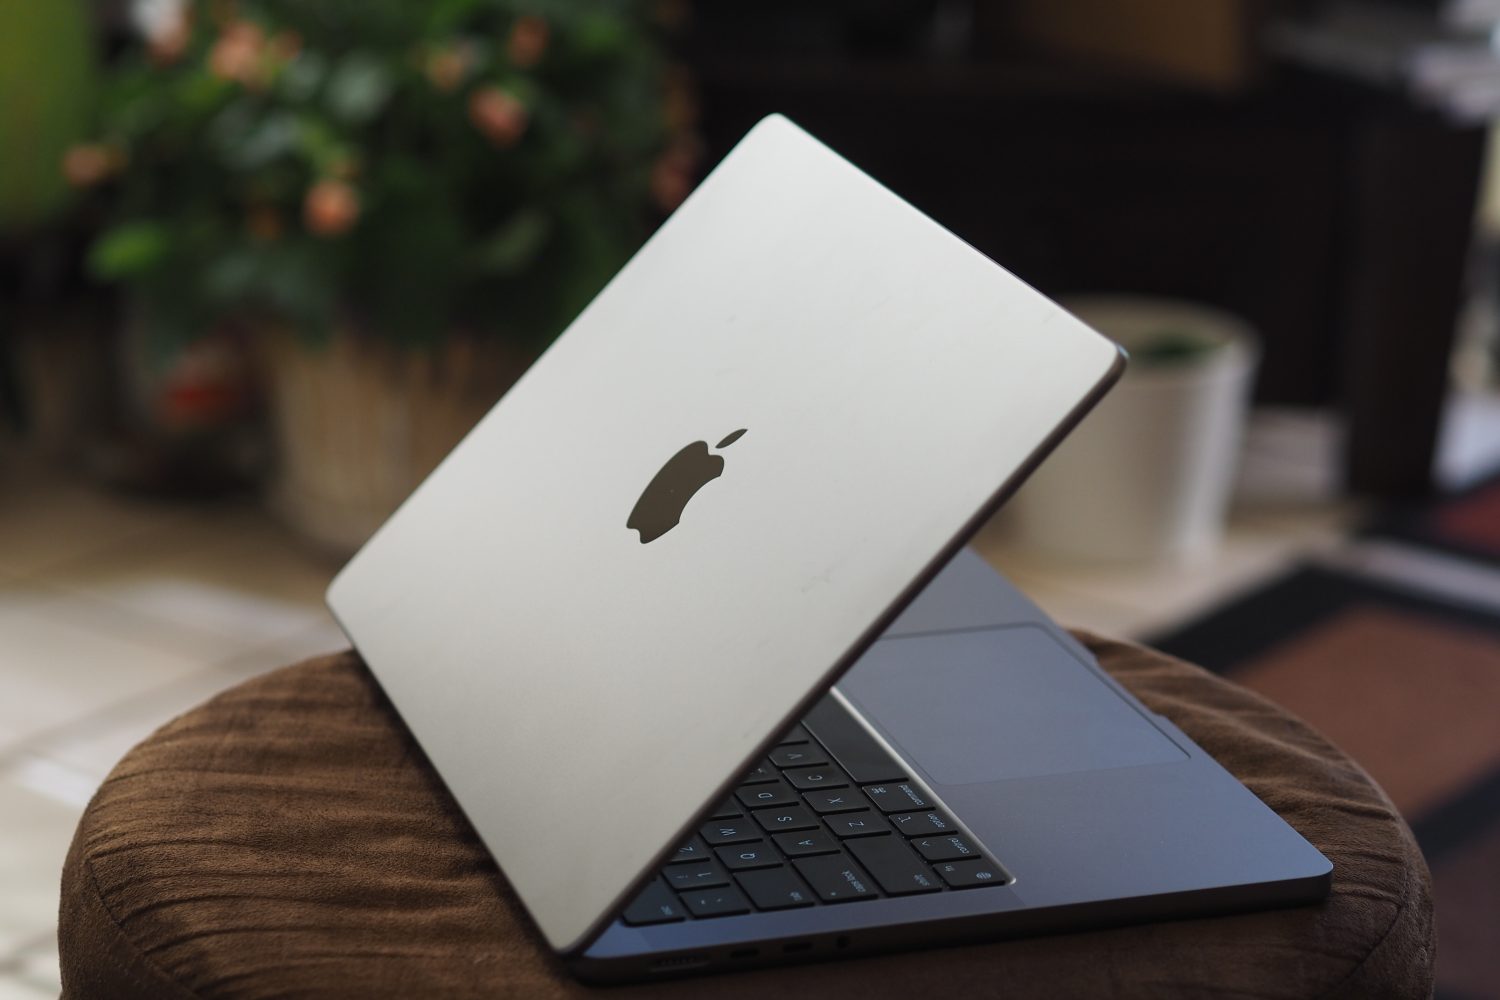 MacBook Air revamp delayed to late 2022, 2023 for 14-inch, 16-inch